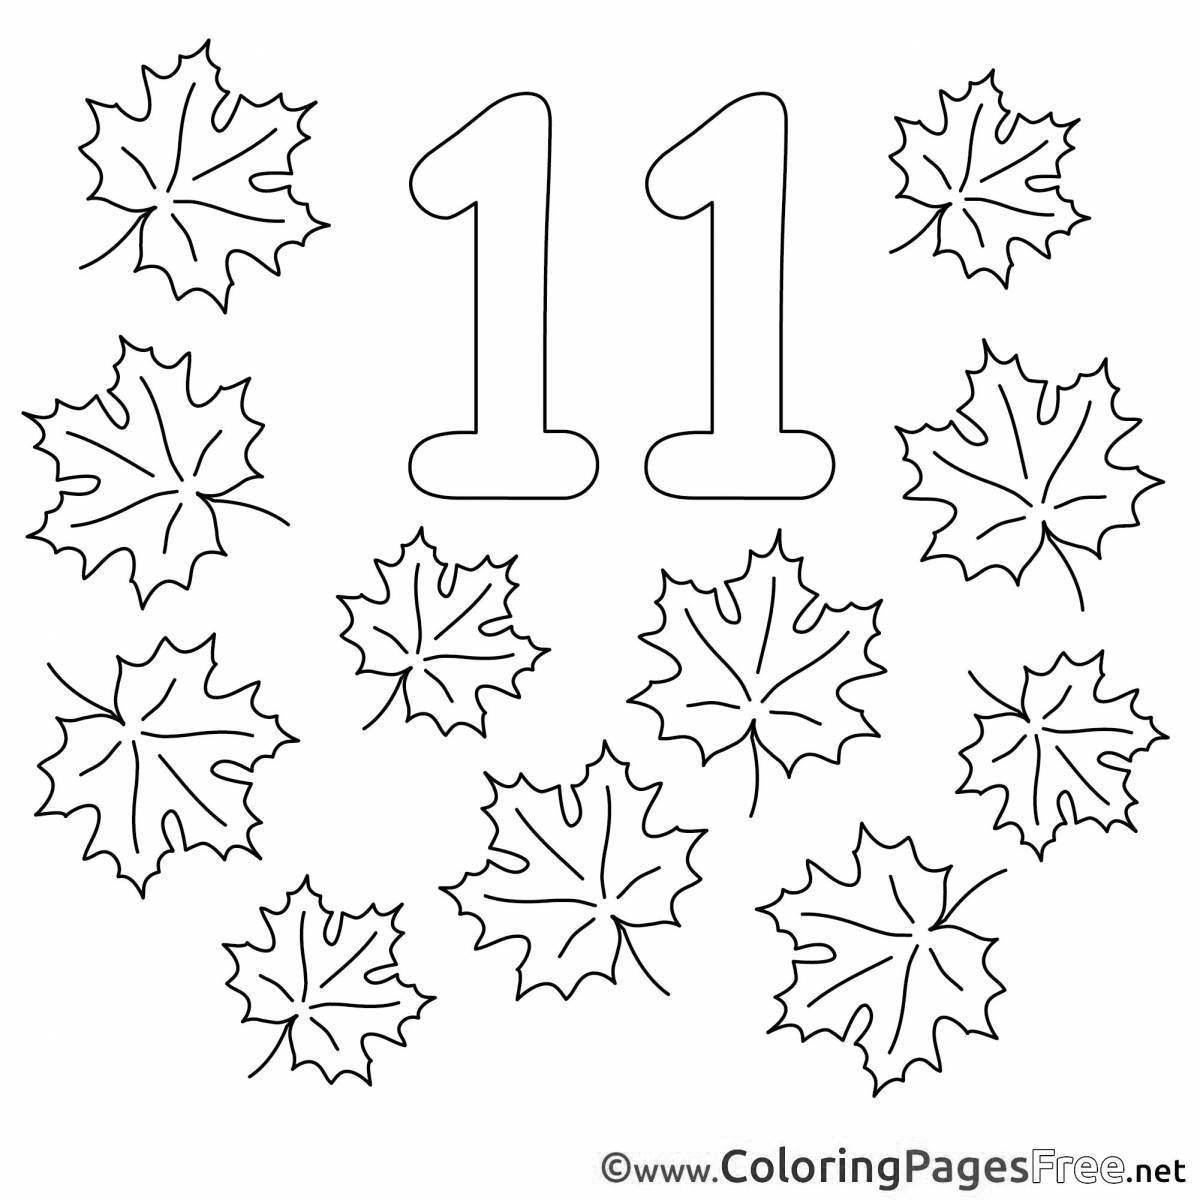 Bright colored coloring page numbers up to 20